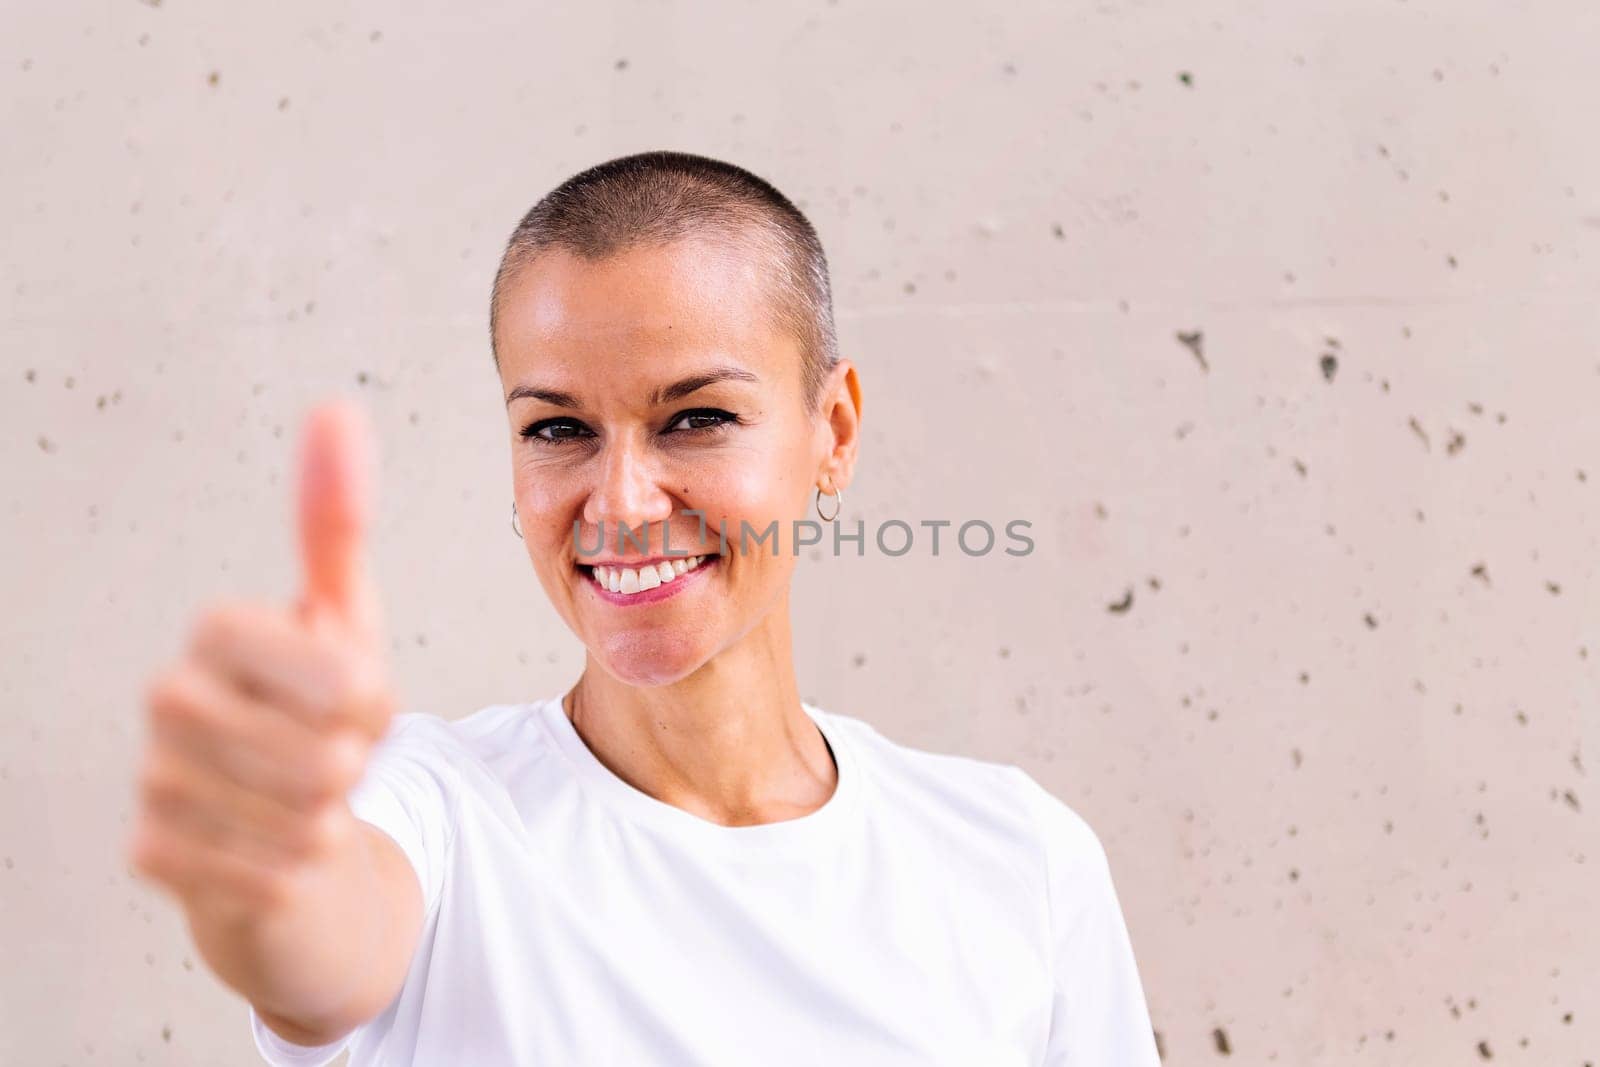 young woman with short hair smiling happy with with thumb up looking at camera, copy space for text